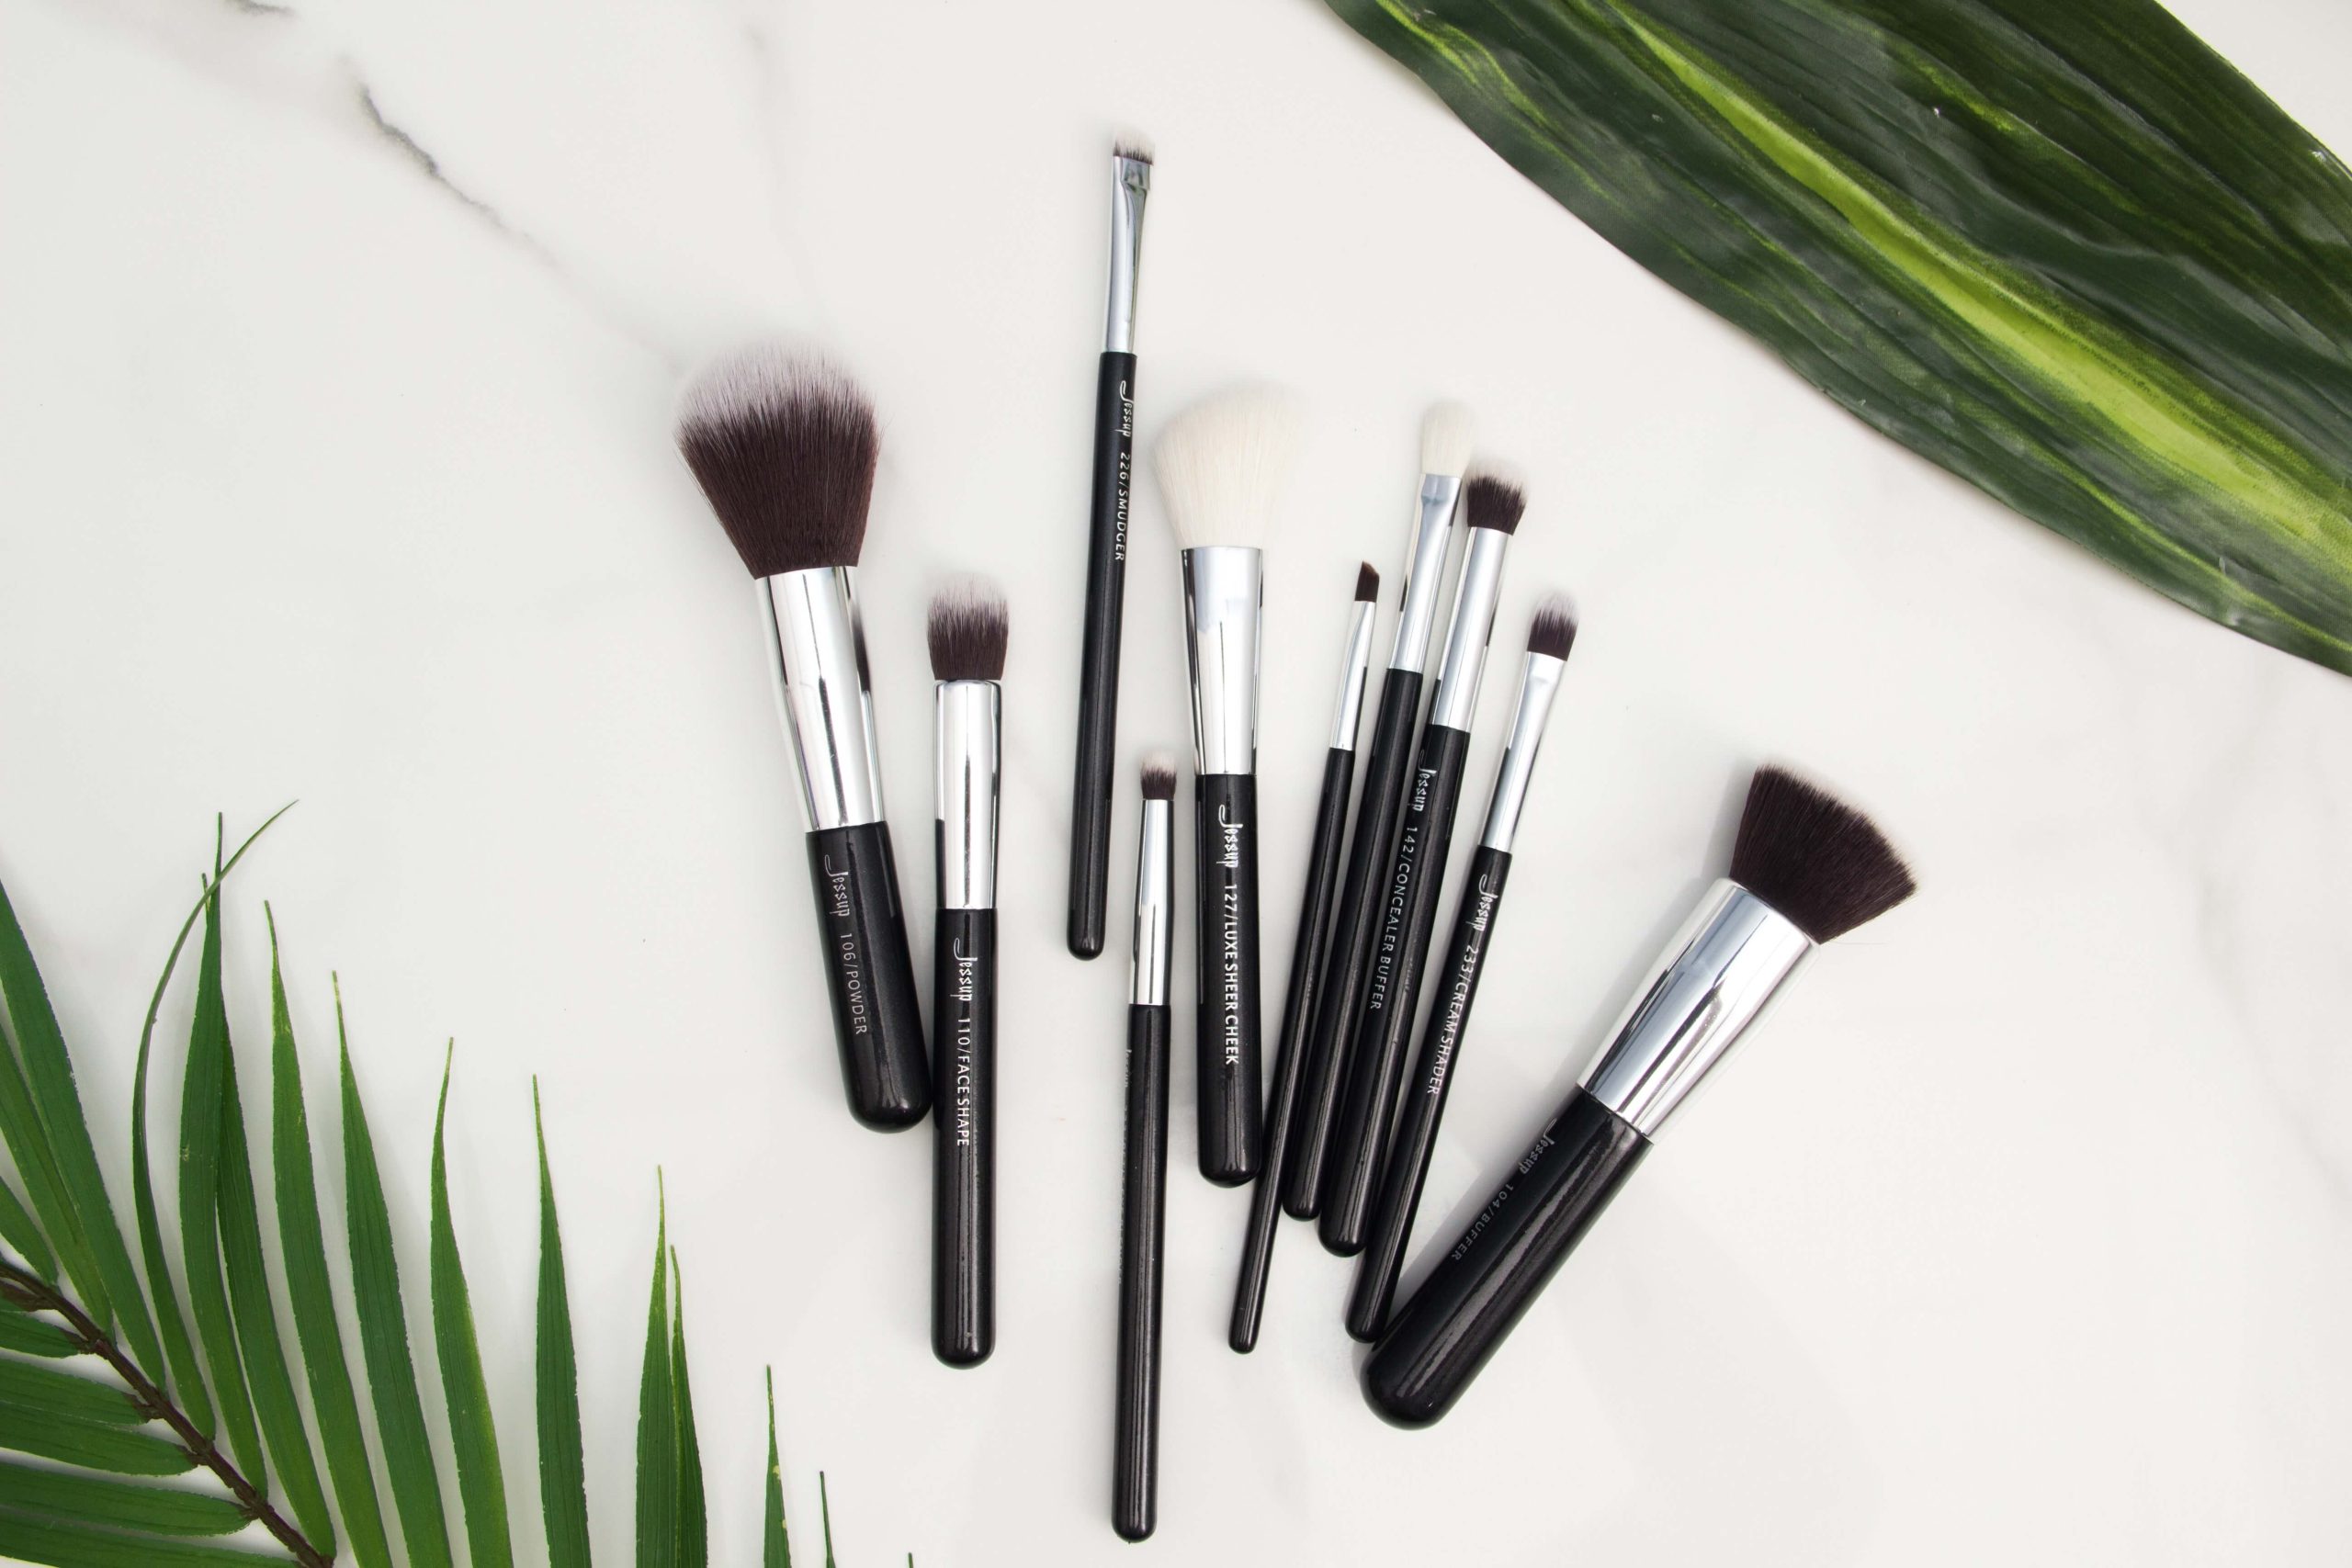 Guide to Makeup Brushes How to Select Makeup Brushes Like A Pro! (5) thumbnail guide to makeup brushes - Guide to Makeup Brushes How to Select Makeup Brushes Like A Pro 5 thumbnail scaled - Guide to Makeup Brushes: How to Select Makeup Brushes Like A Pro!